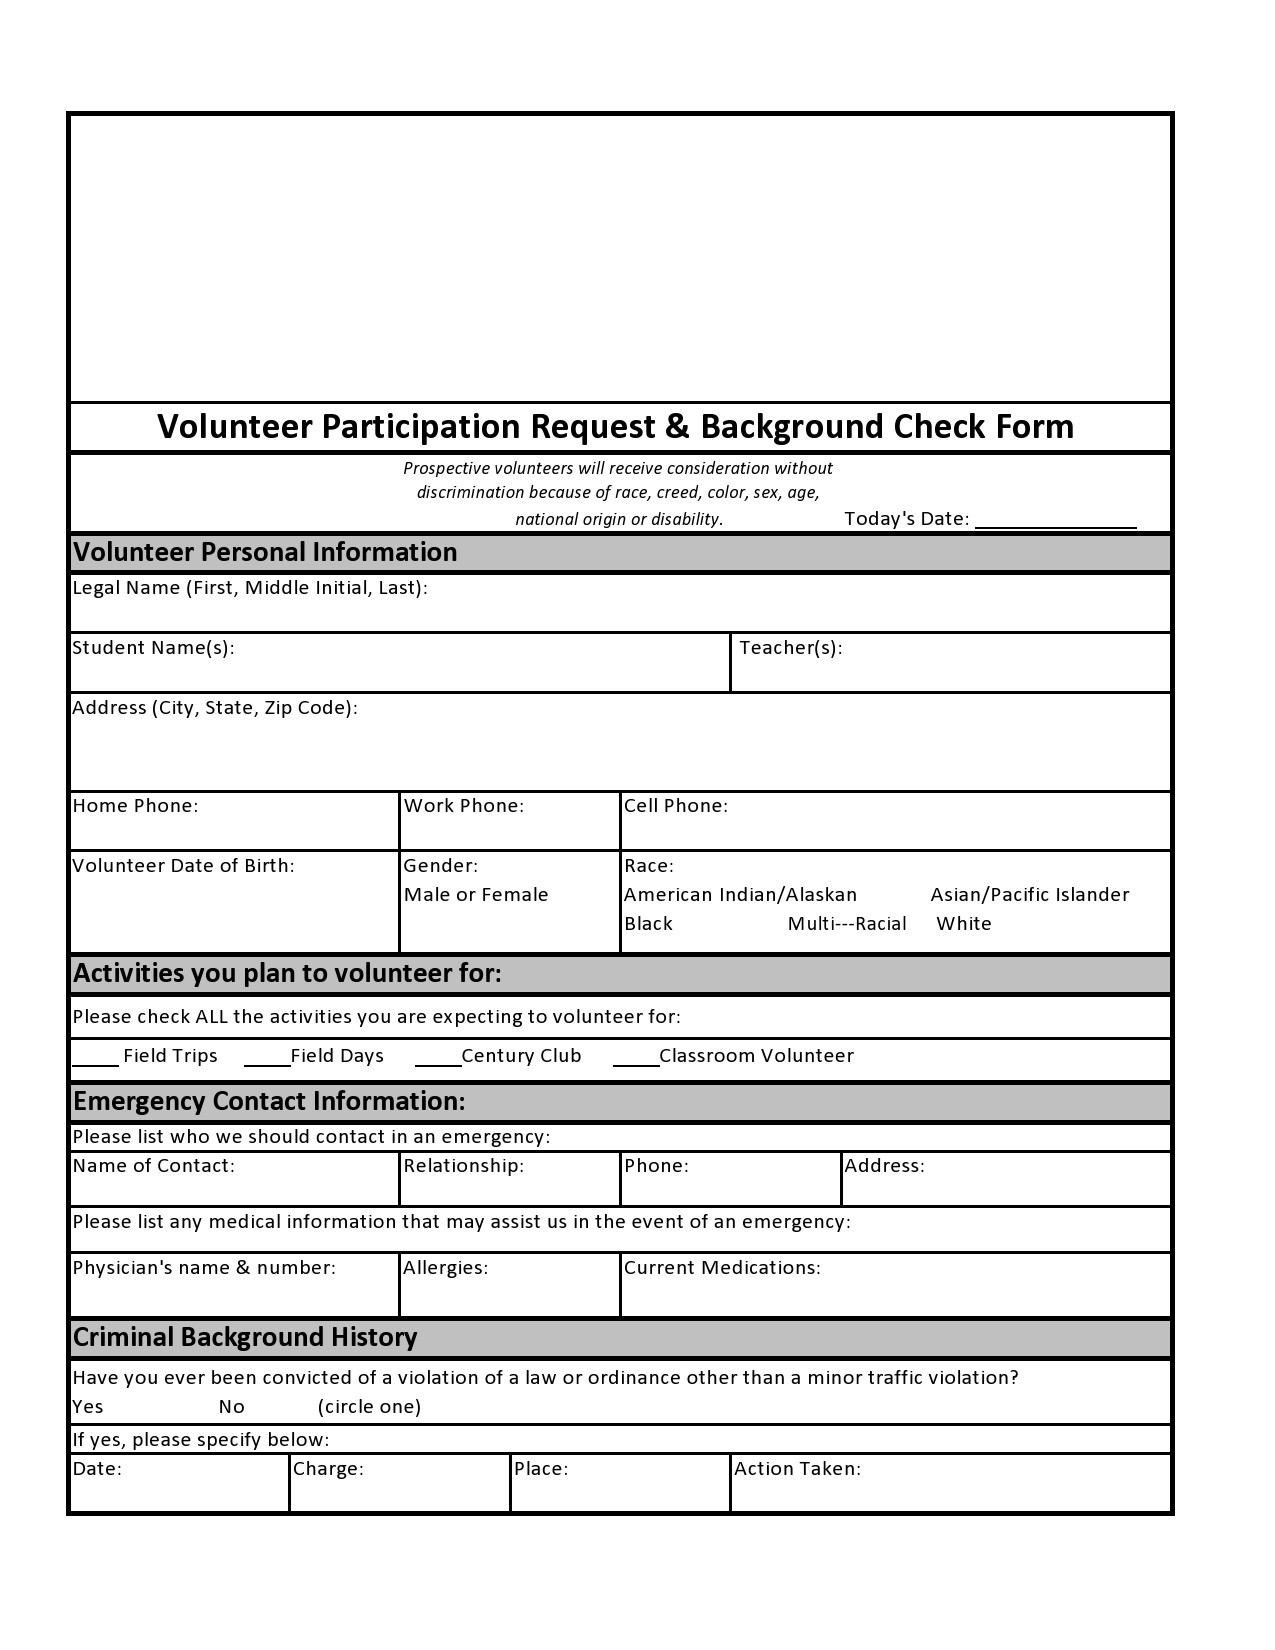 Background Check Form Template from templatelab.com